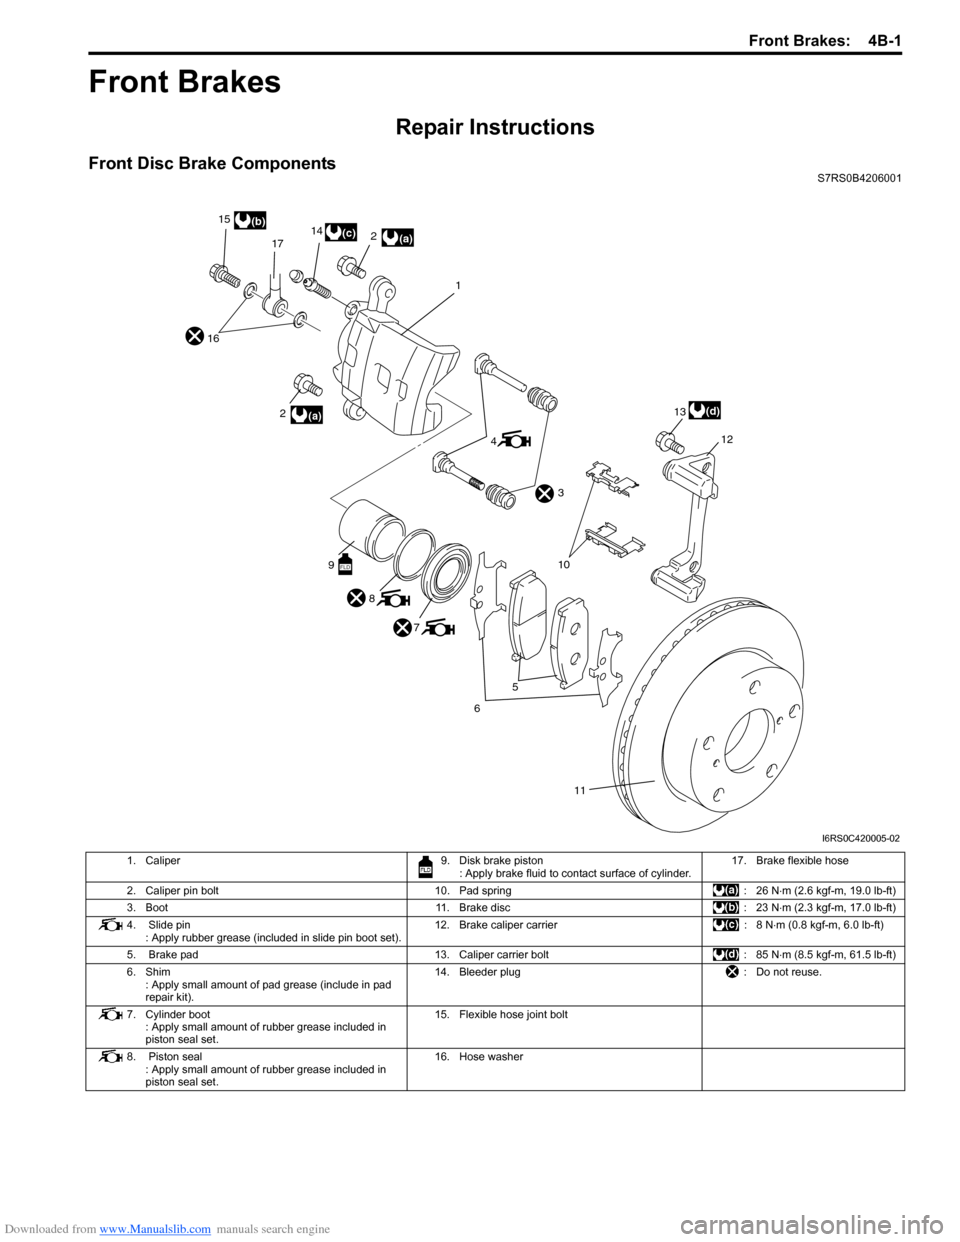 SUZUKI SWIFT 2006 2.G Service Workshop Manual Downloaded from www.Manualslib.com manuals search engine Front Brakes:  4B-1
Brakes
Front Brakes
Repair Instructions
Front Disc Brake ComponentsS7RS0B4206001
11
5
6
10
4
1
16
17
12
8
7
3
2(a)
15
(b)
1